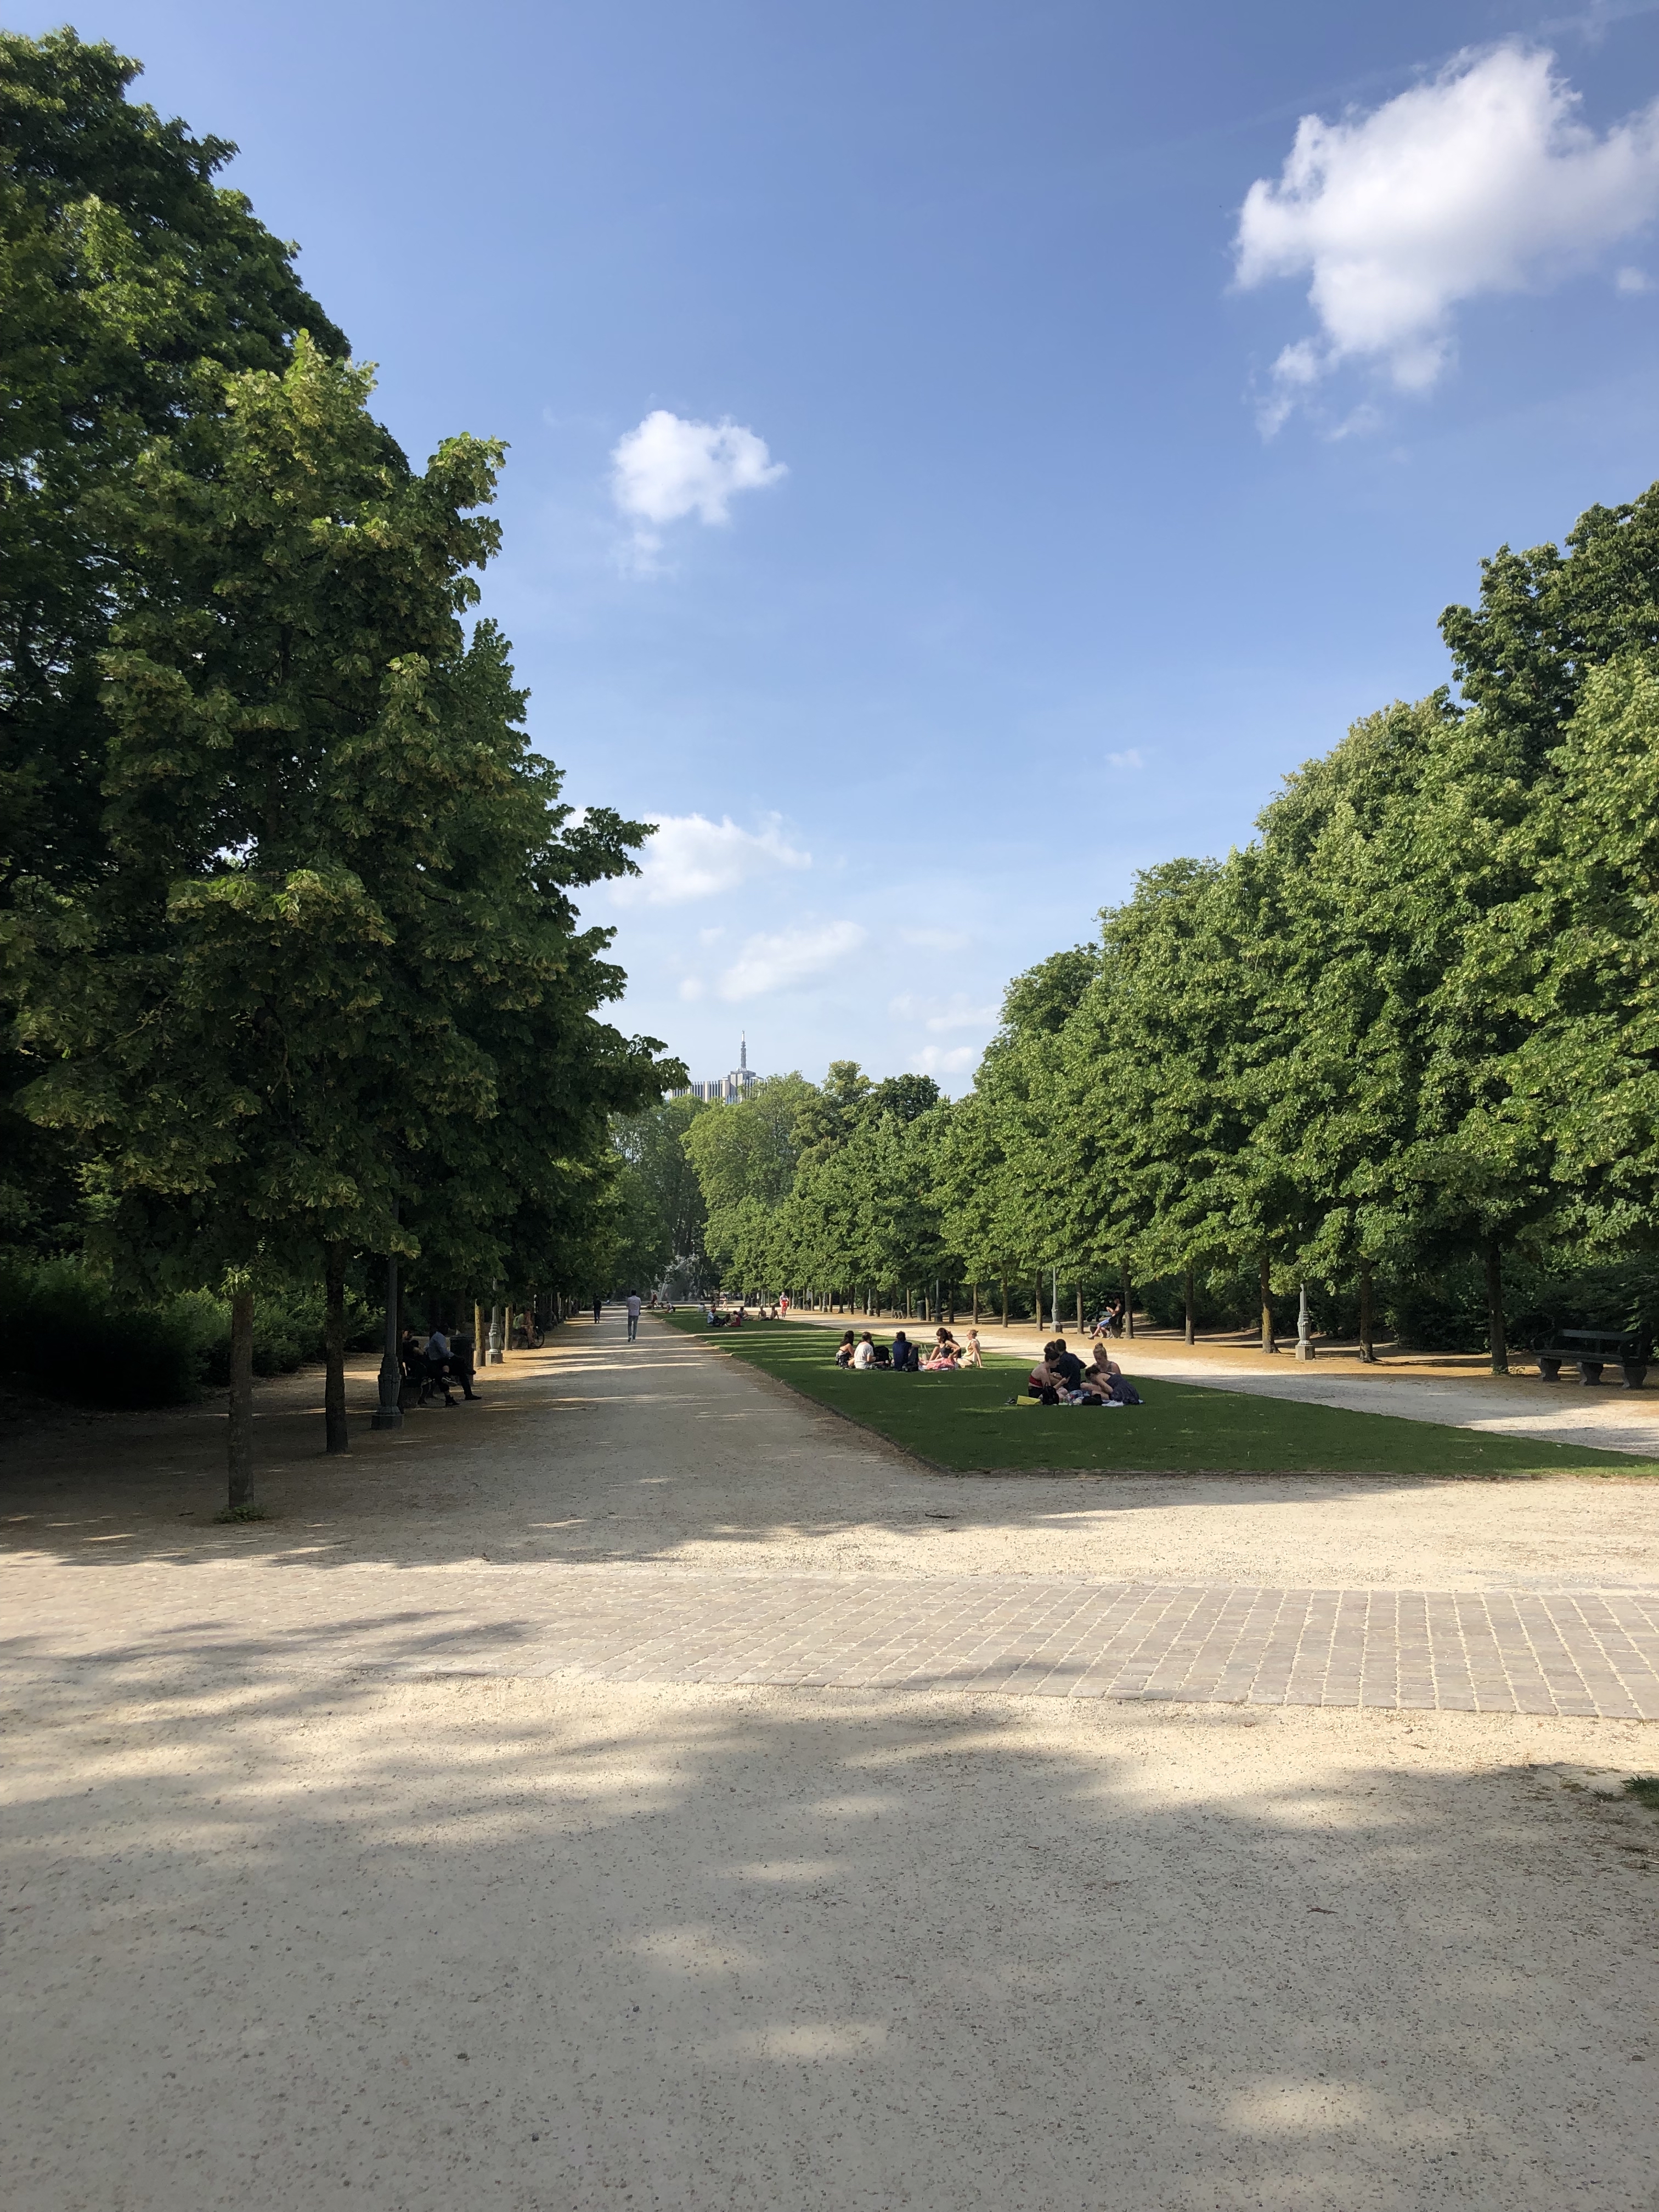 Park in Brussels with lush green trees